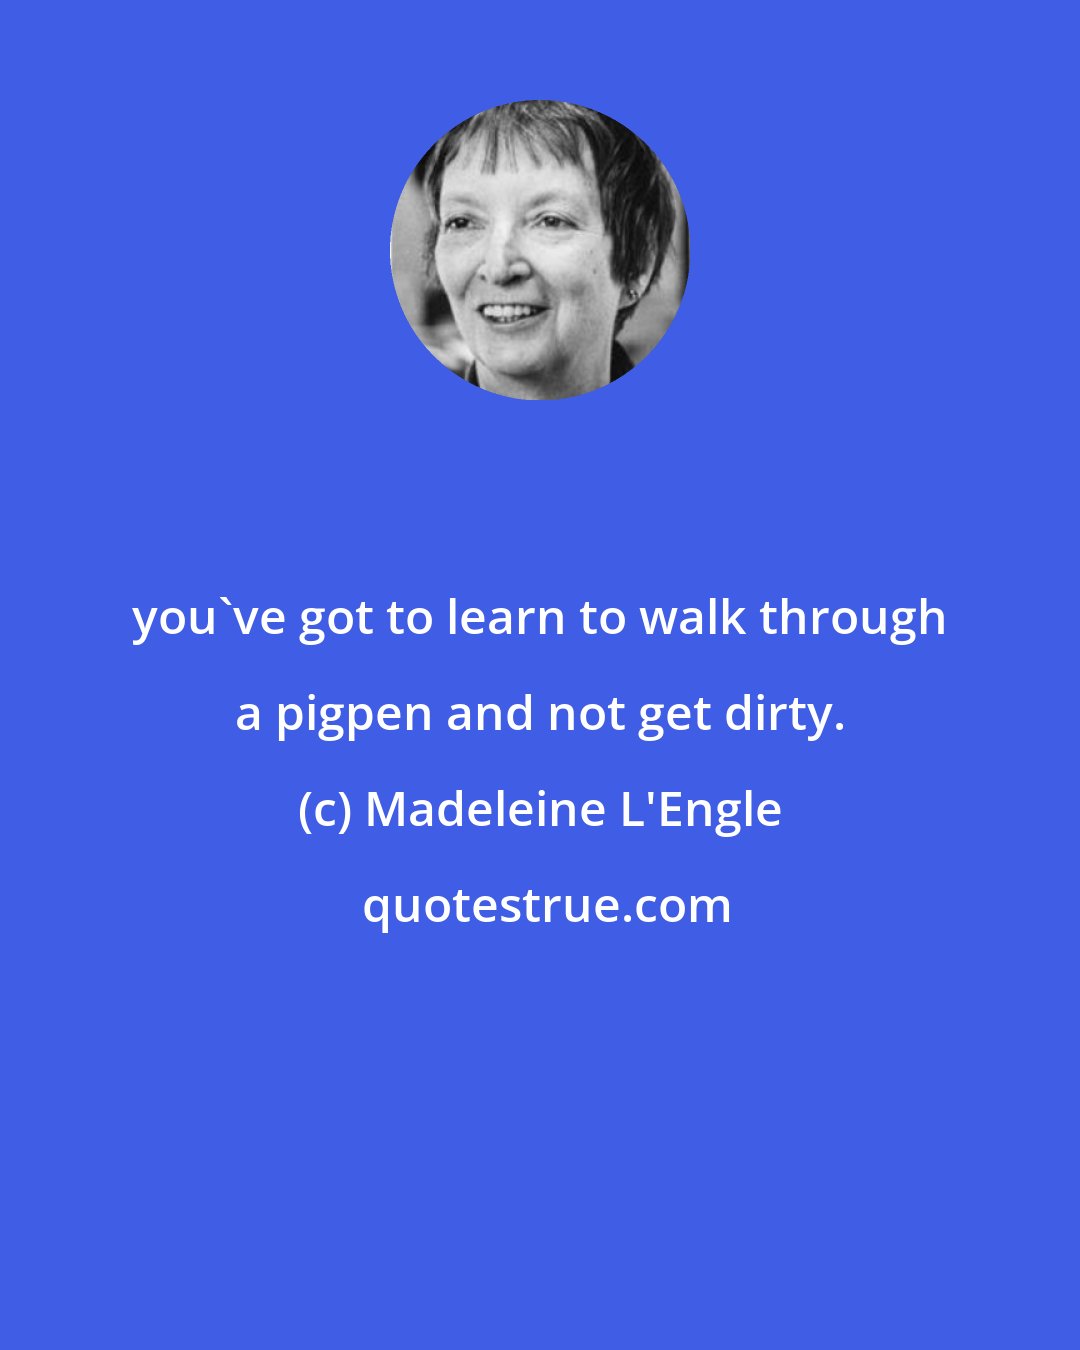 Madeleine L'Engle: you've got to learn to walk through a pigpen and not get dirty.